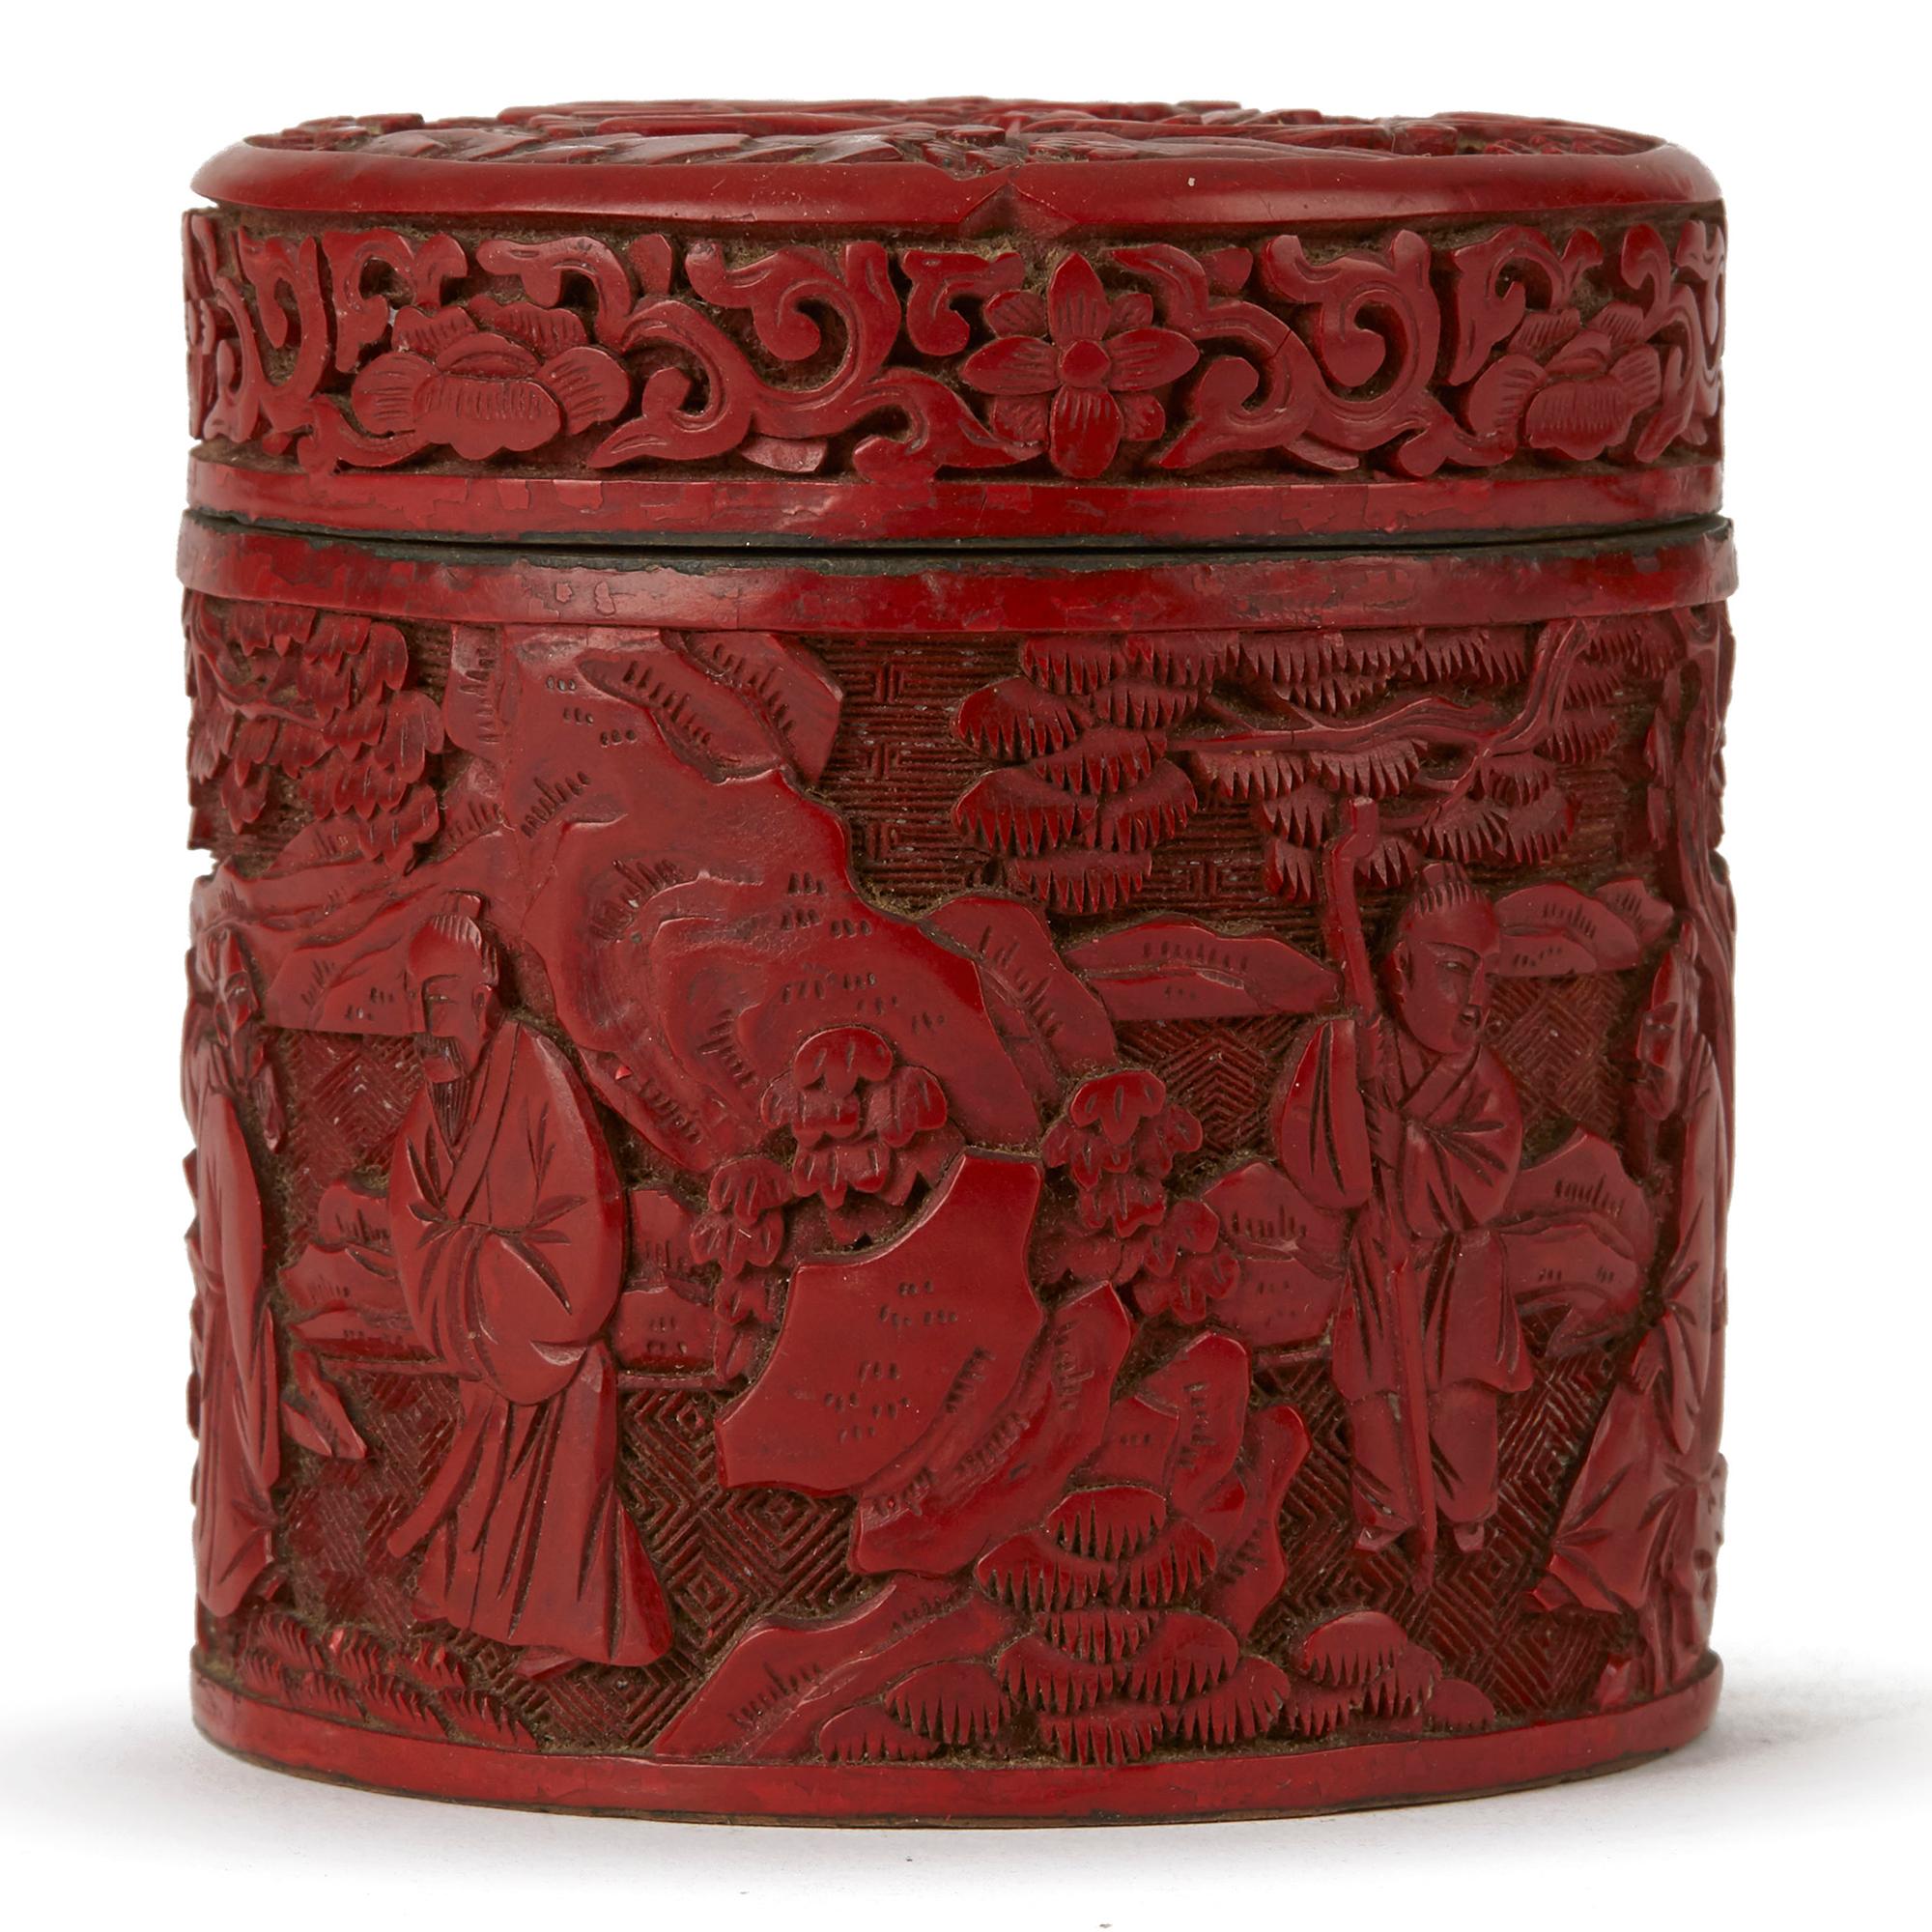 Hand-Carved Chinese Qing Cinnabar Lacquer Lidded Box, 19th Century